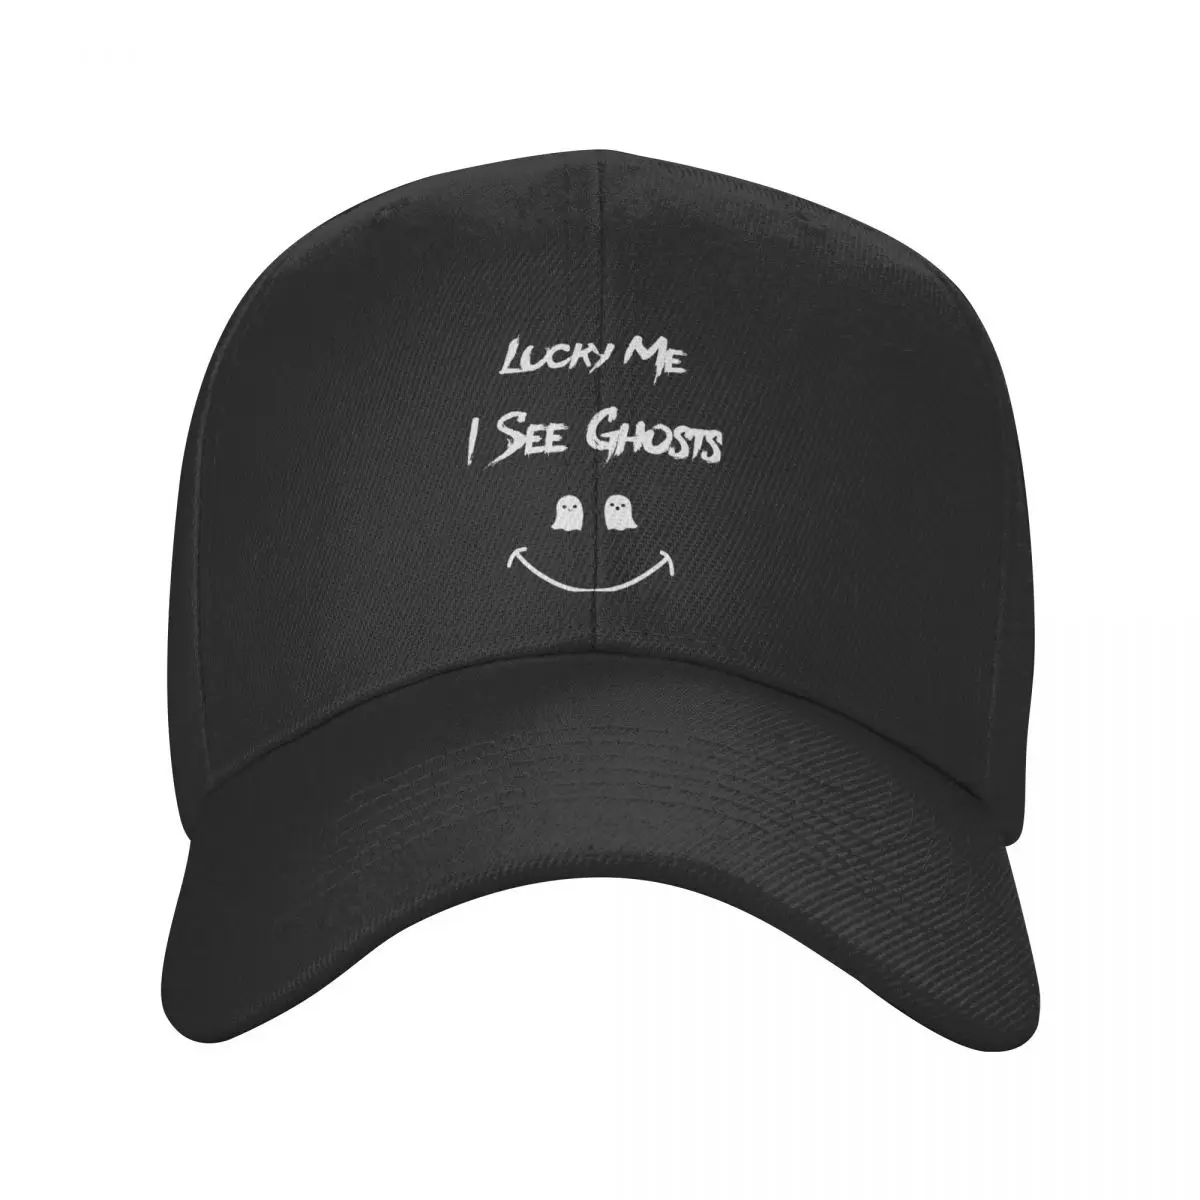 

Fashion Kanye West Lucky Me I See Ghosts Baseball Cap Men Women Breathable Dad Hat Summer Sports Hats Snapback Caps